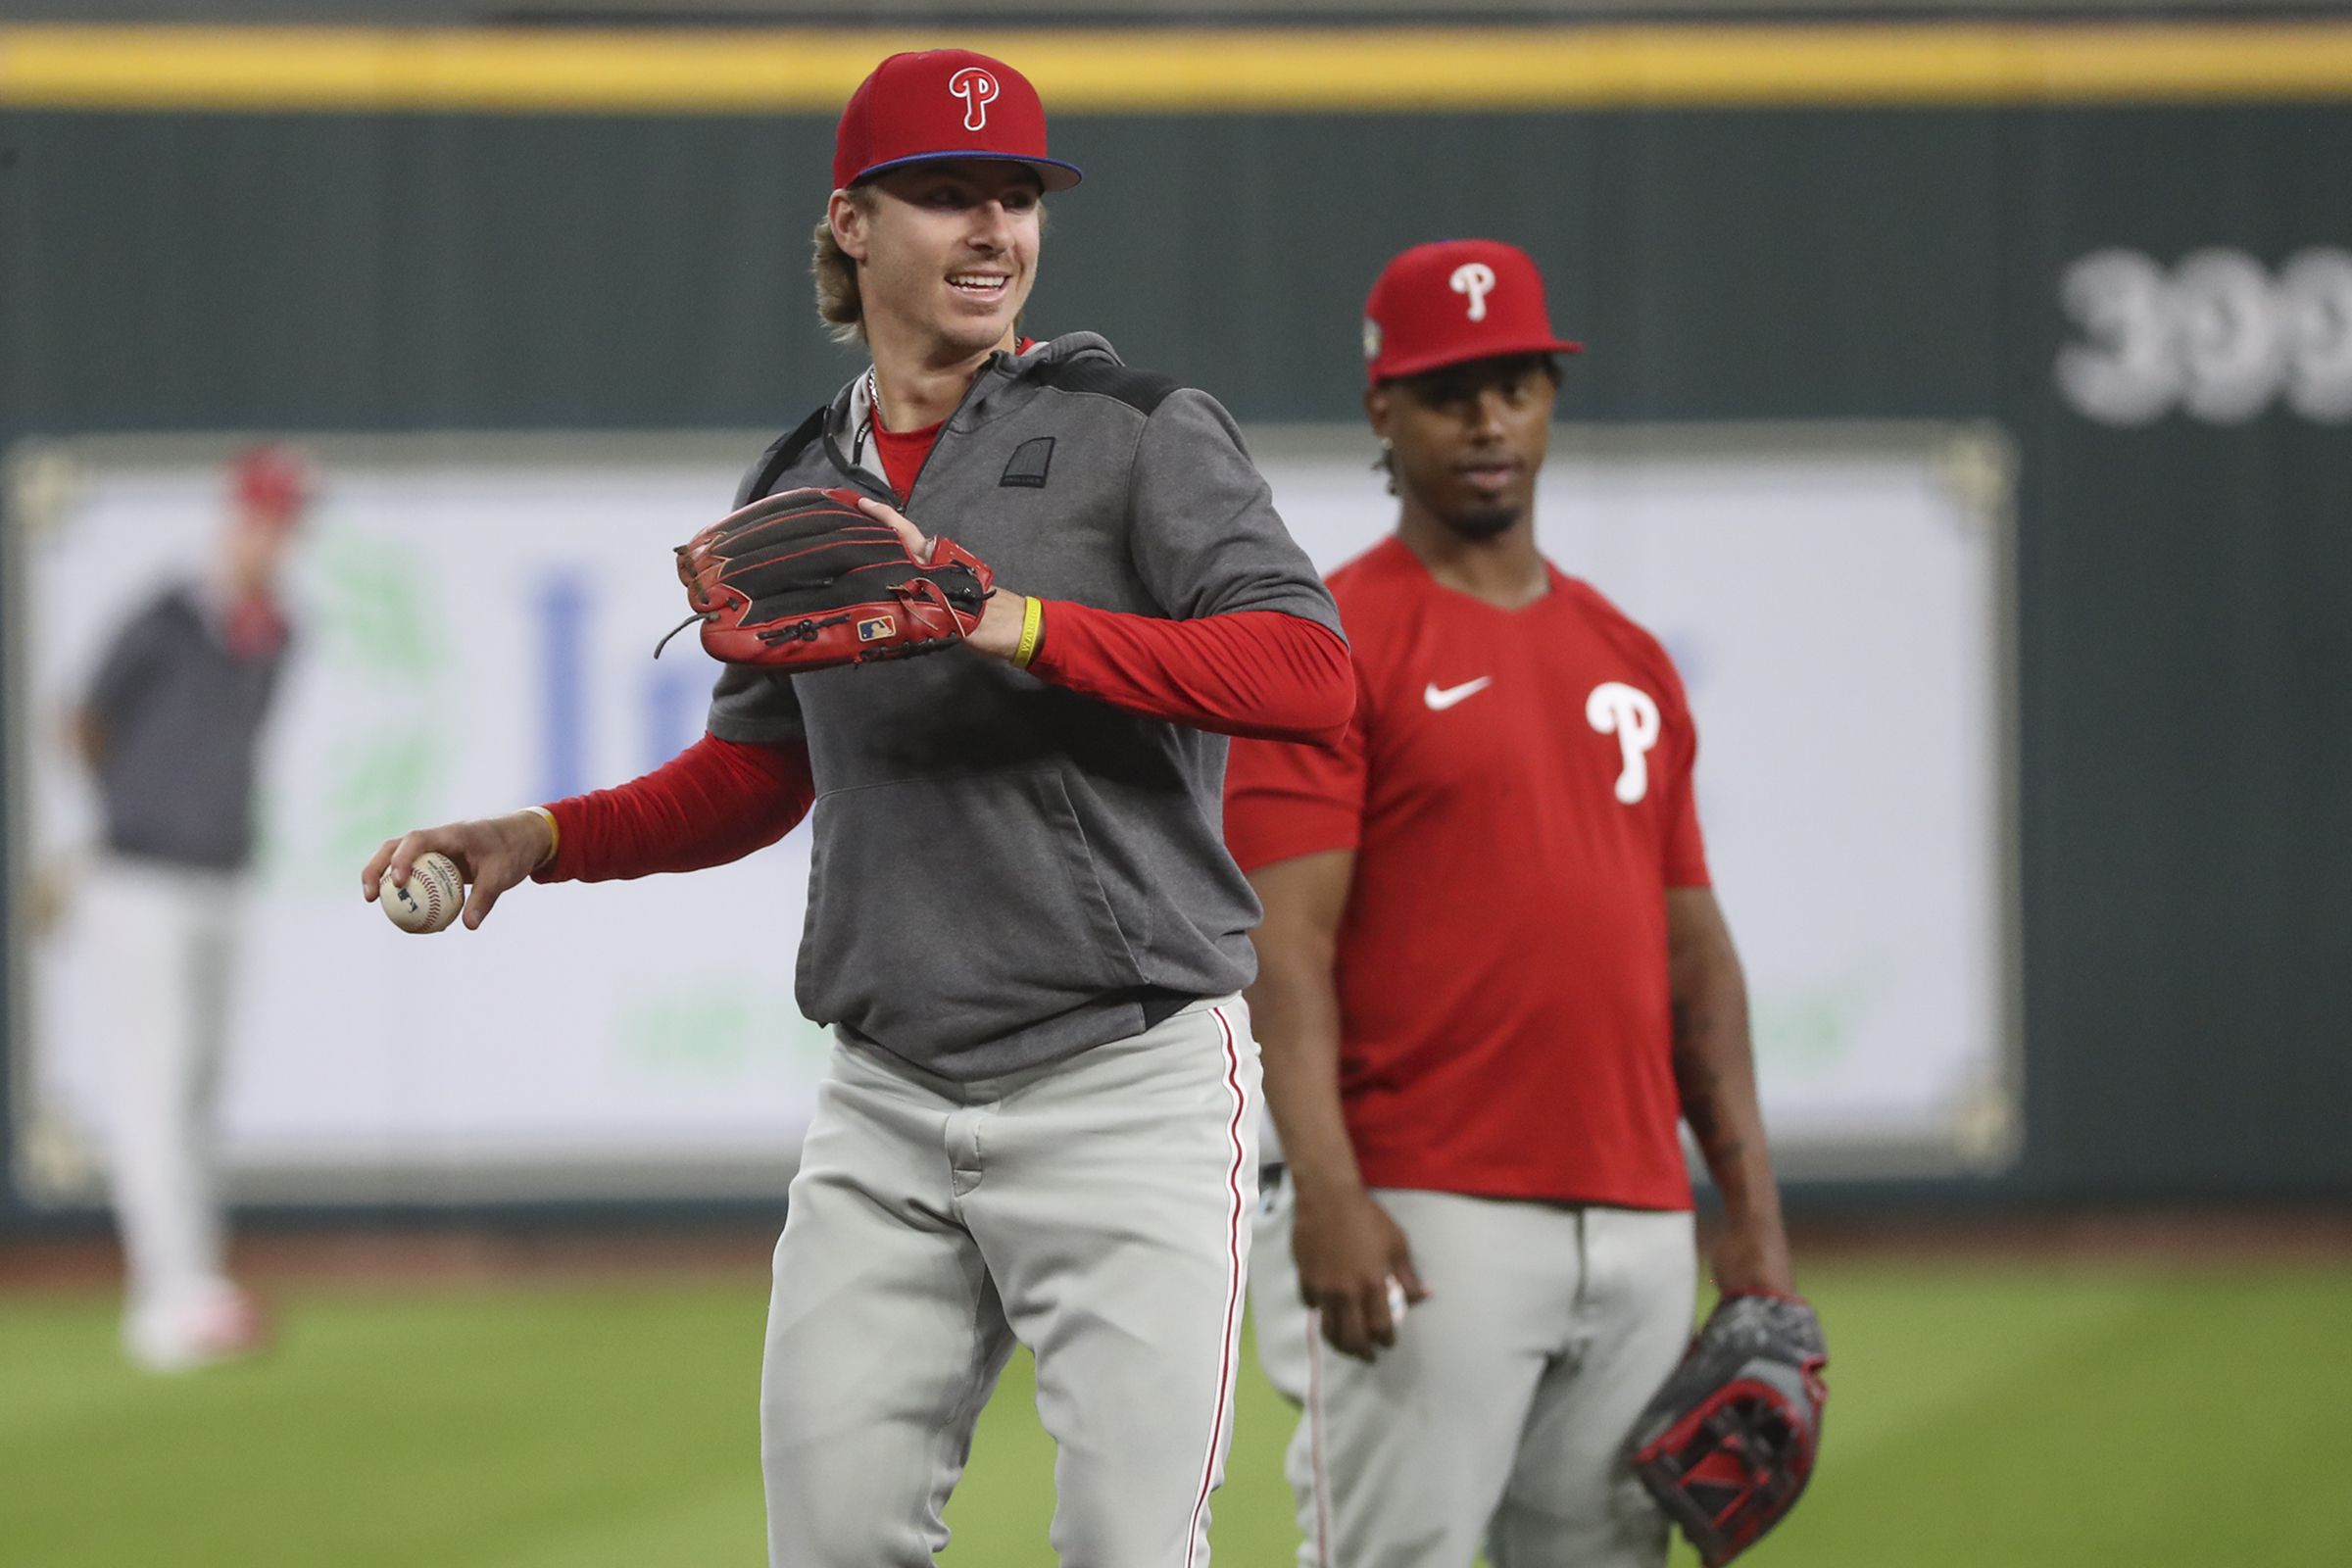 No moment seems too big for Phillies rookie Bryson Stott, including the  World Series